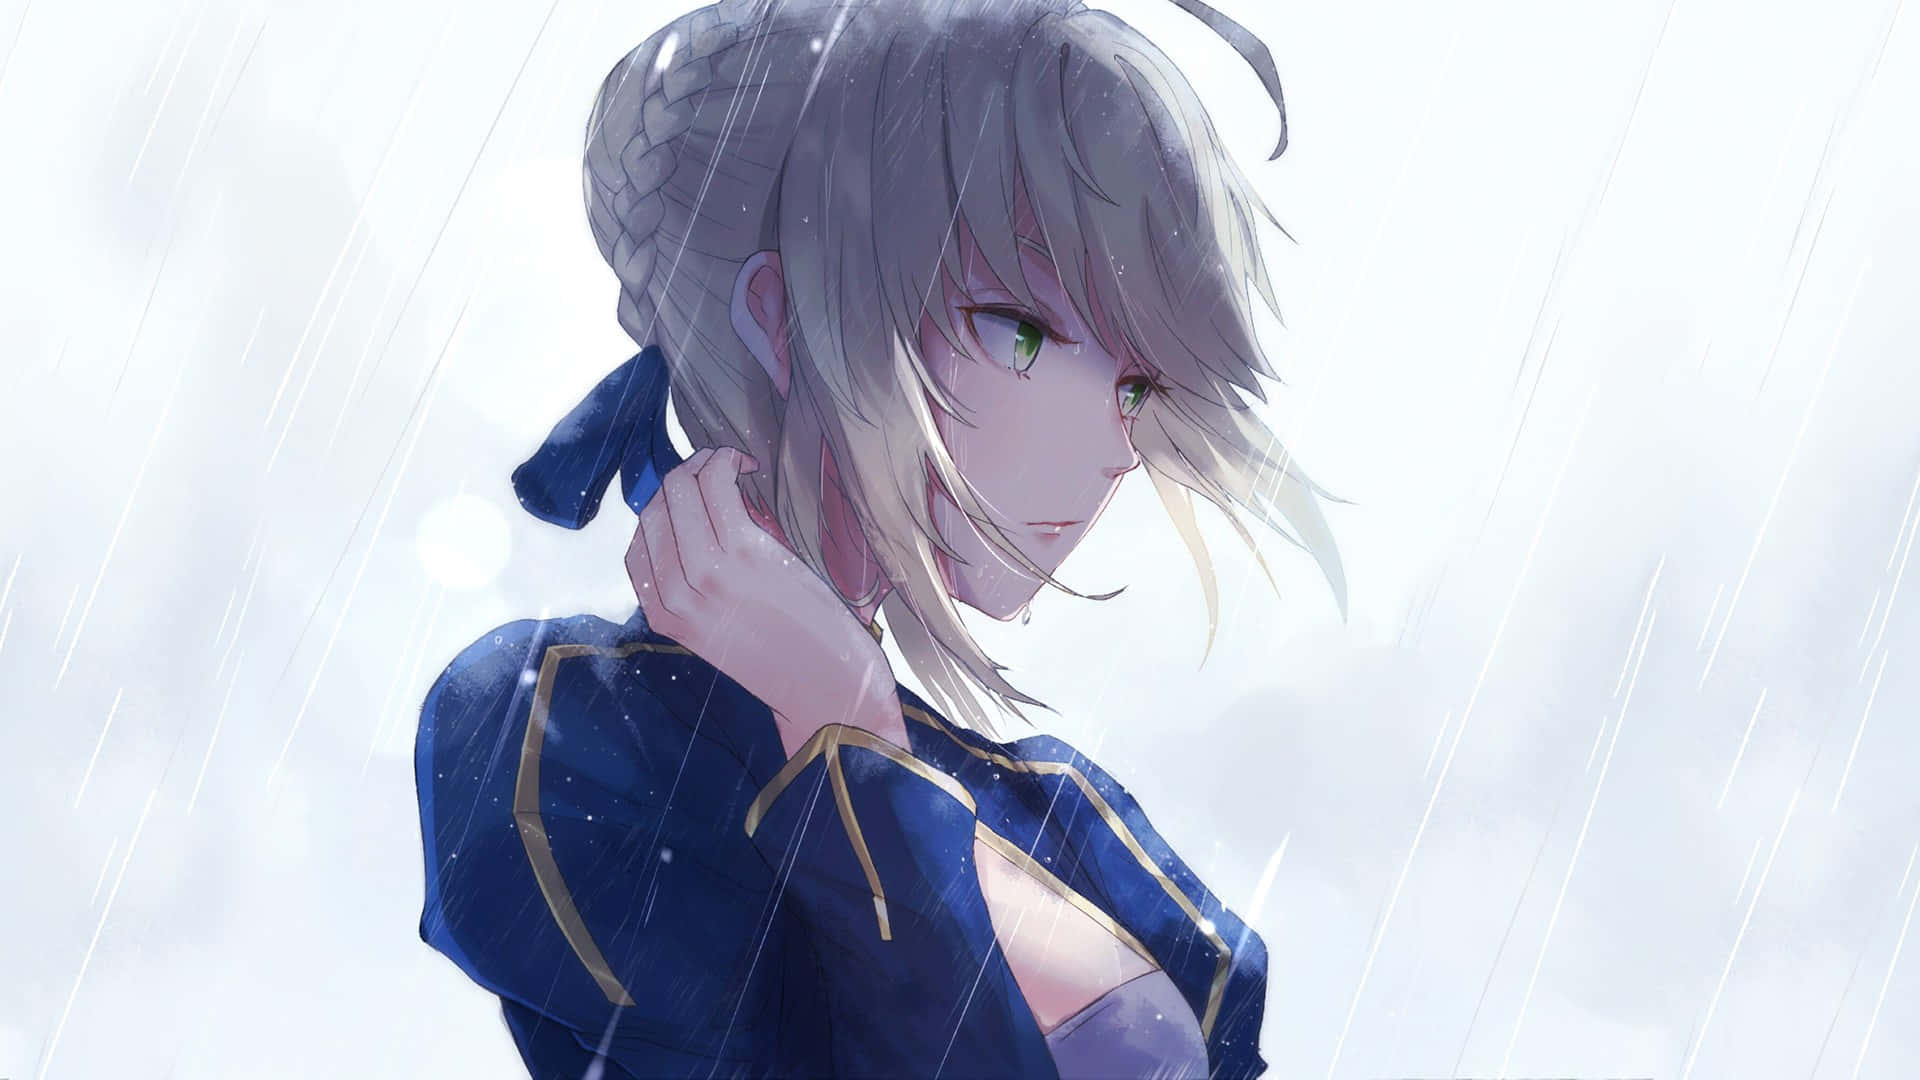 Saber Fate Stay Night In The Rain Wallpaper